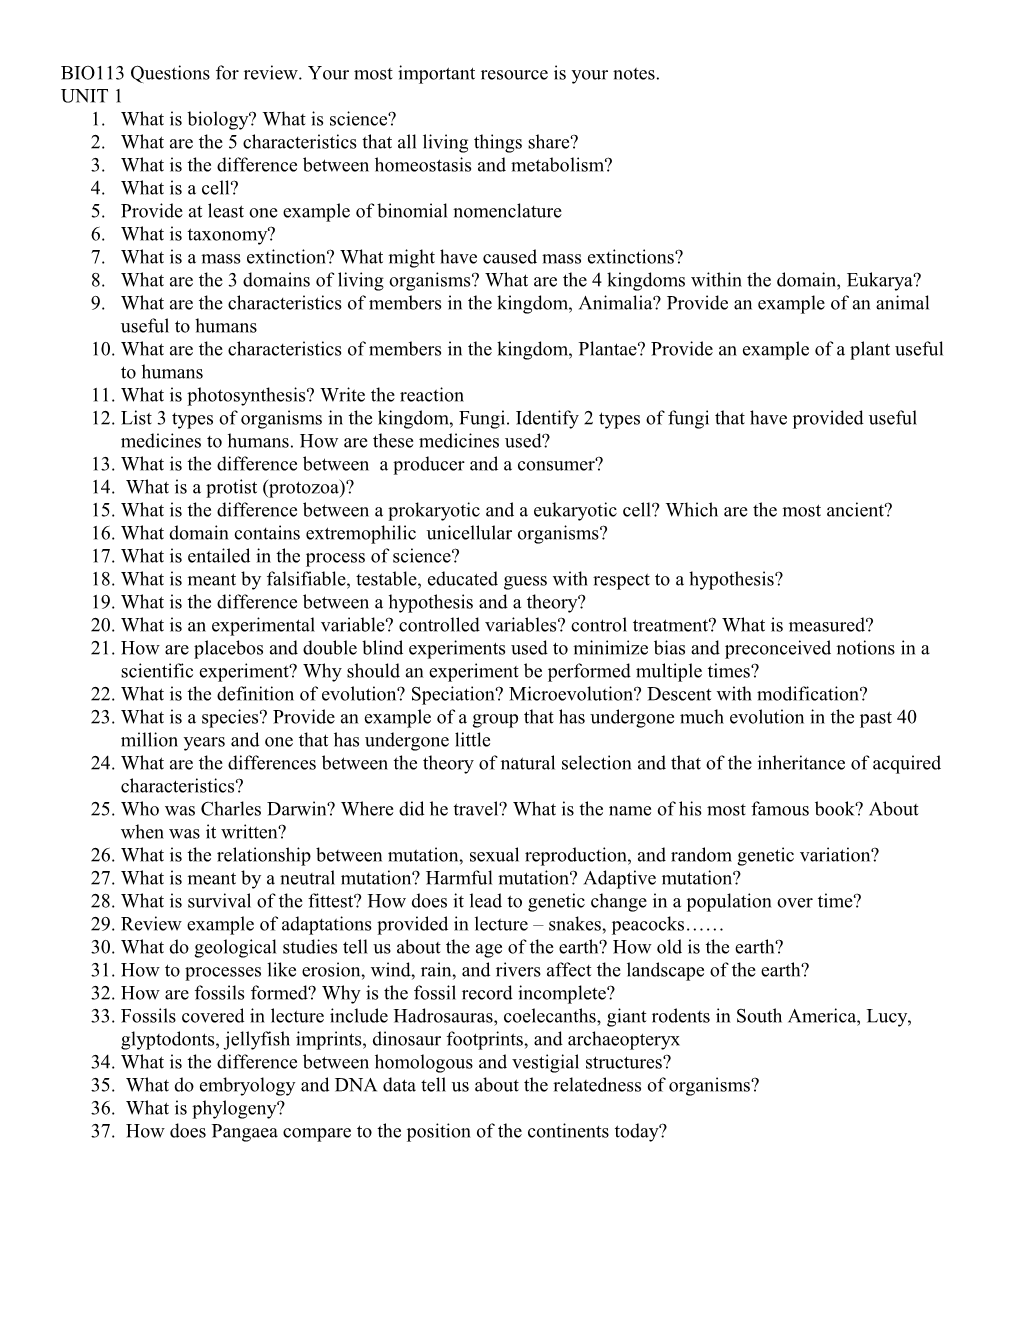 BIO113 Questions for Review. Your Most Important Resource Is Your Notes